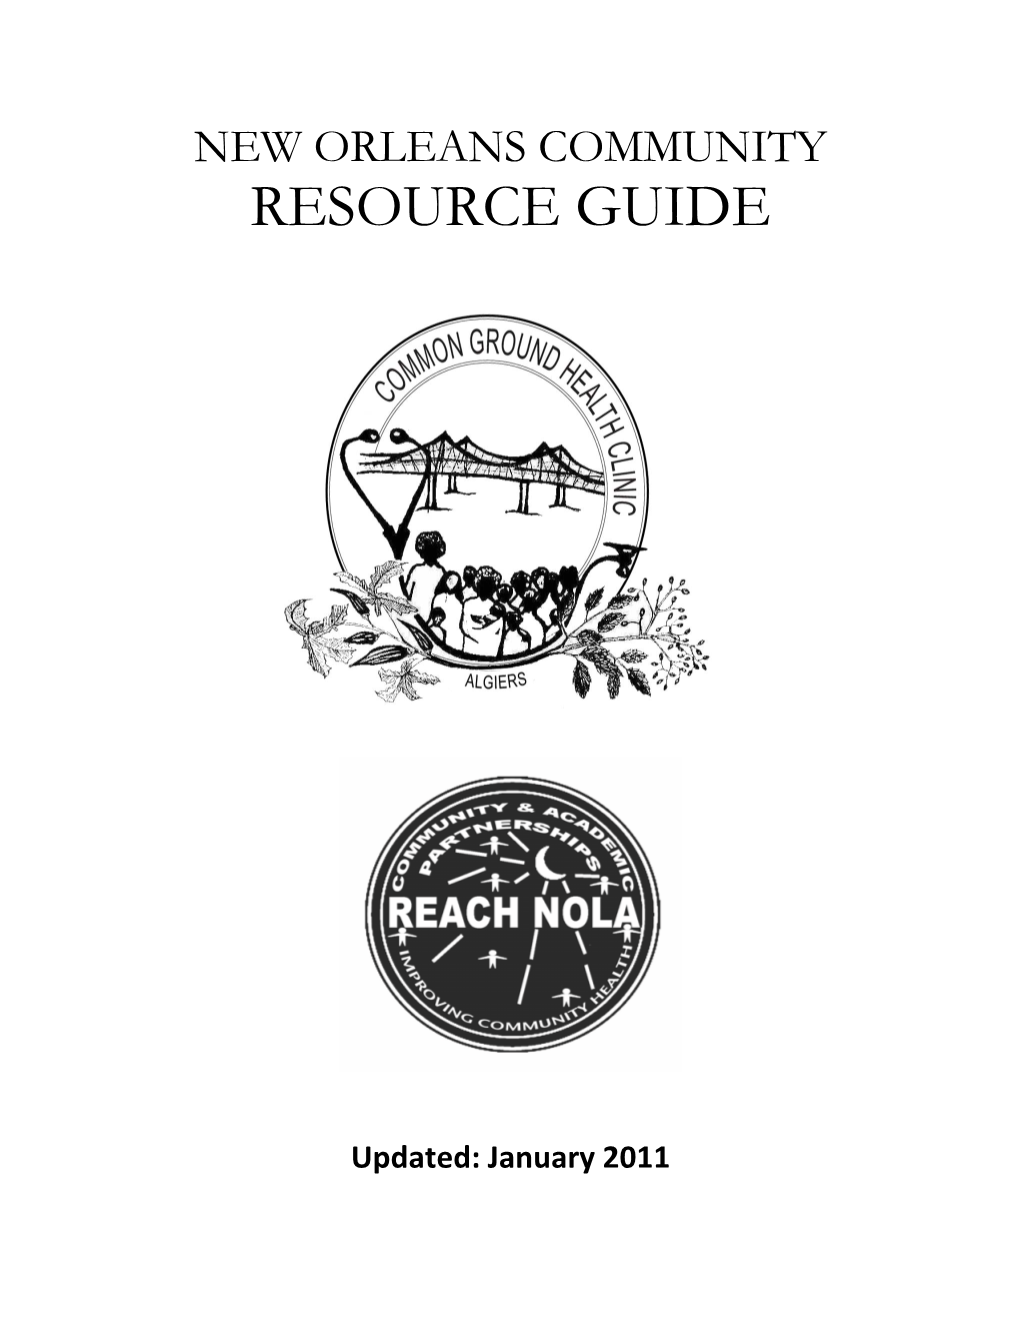 New Orleans Community Resource Guide